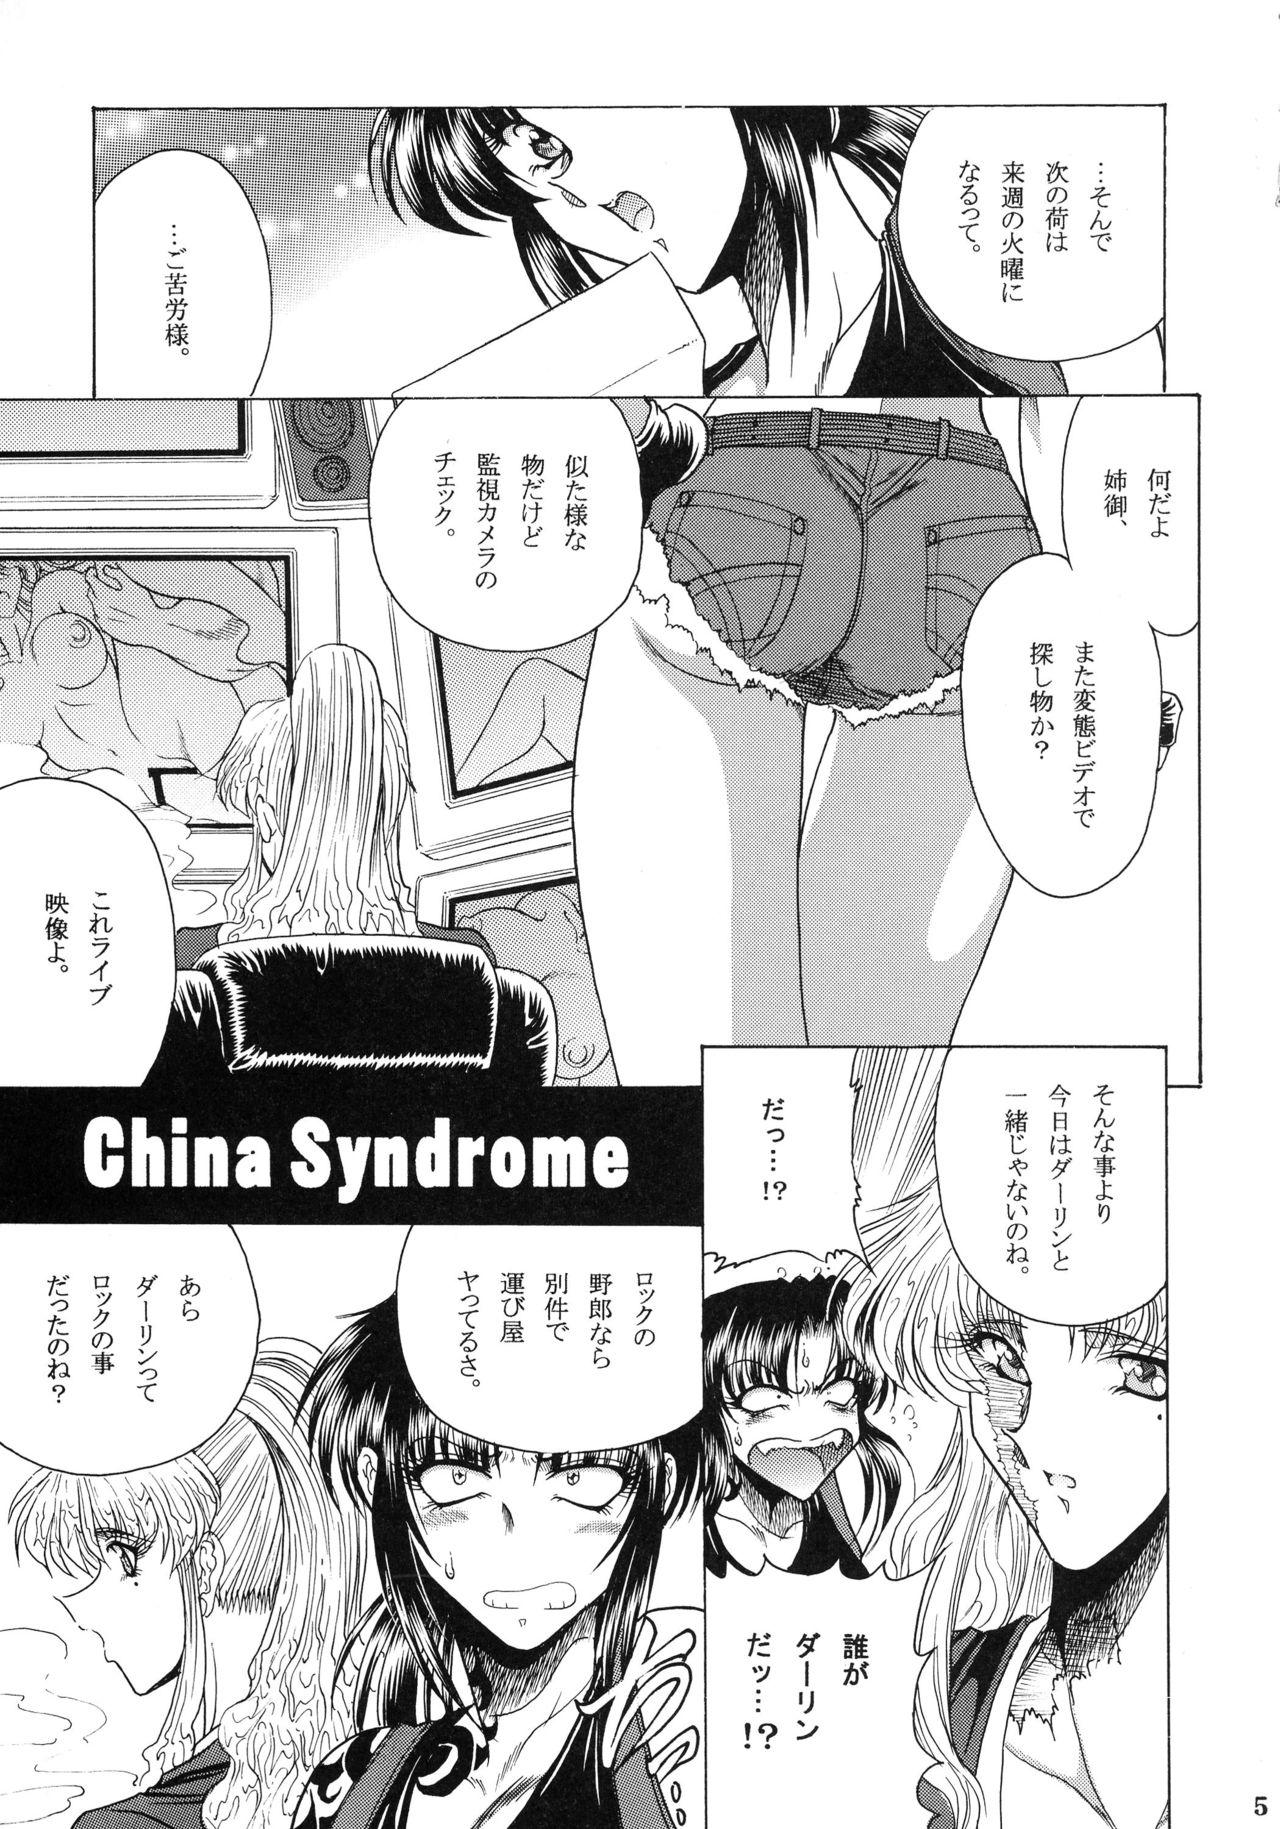 Sexy Whores ZONE 38 China Syndrome - Black lagoon Fuck Pussy - Page 4